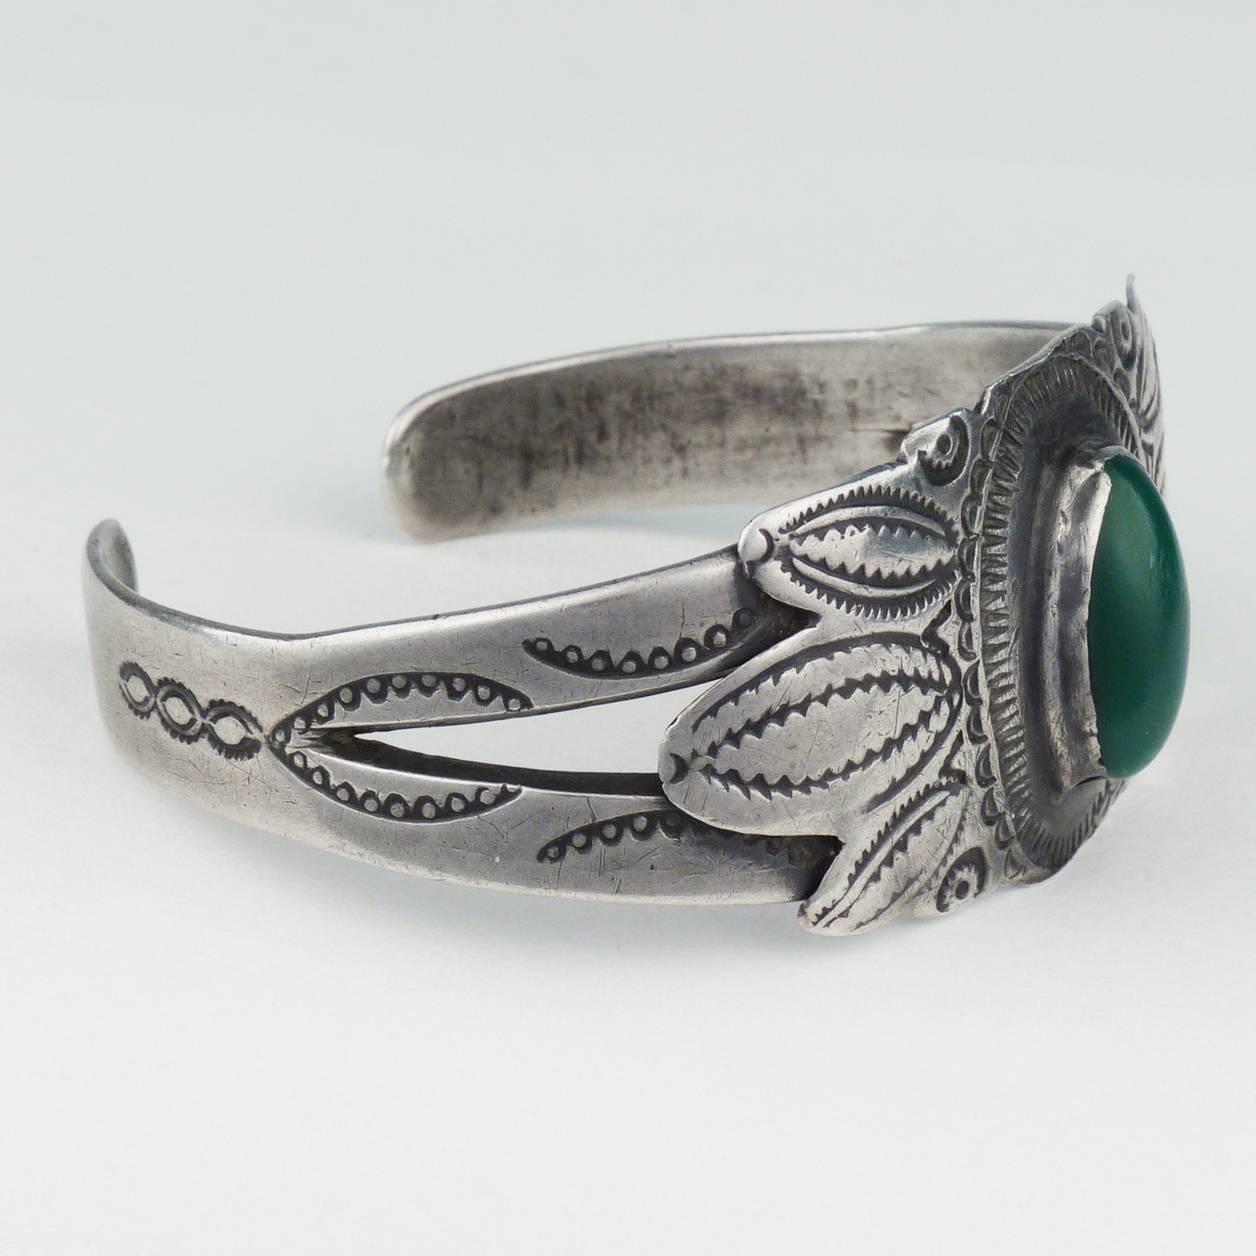 An early example of Navajo silverwork. Incredible patina and wear, hand wrought silver, and a handmade bezel surrounding the Cerrillos turquoise cabochon. 5.63" cuff, 1" opening. 